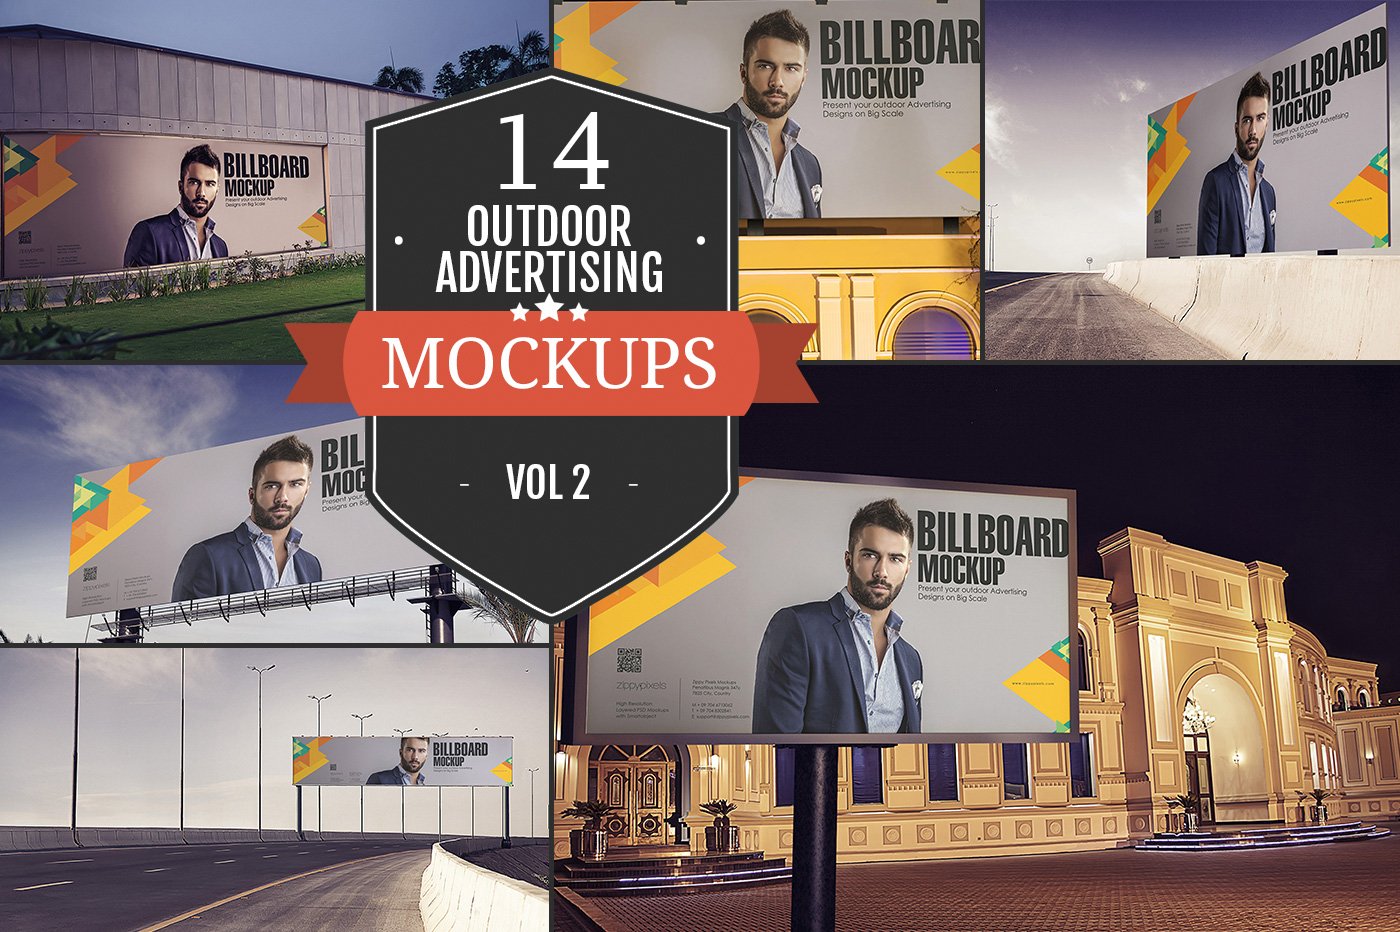 Outdoor Advertising Mockup Vol. 2 cover image.